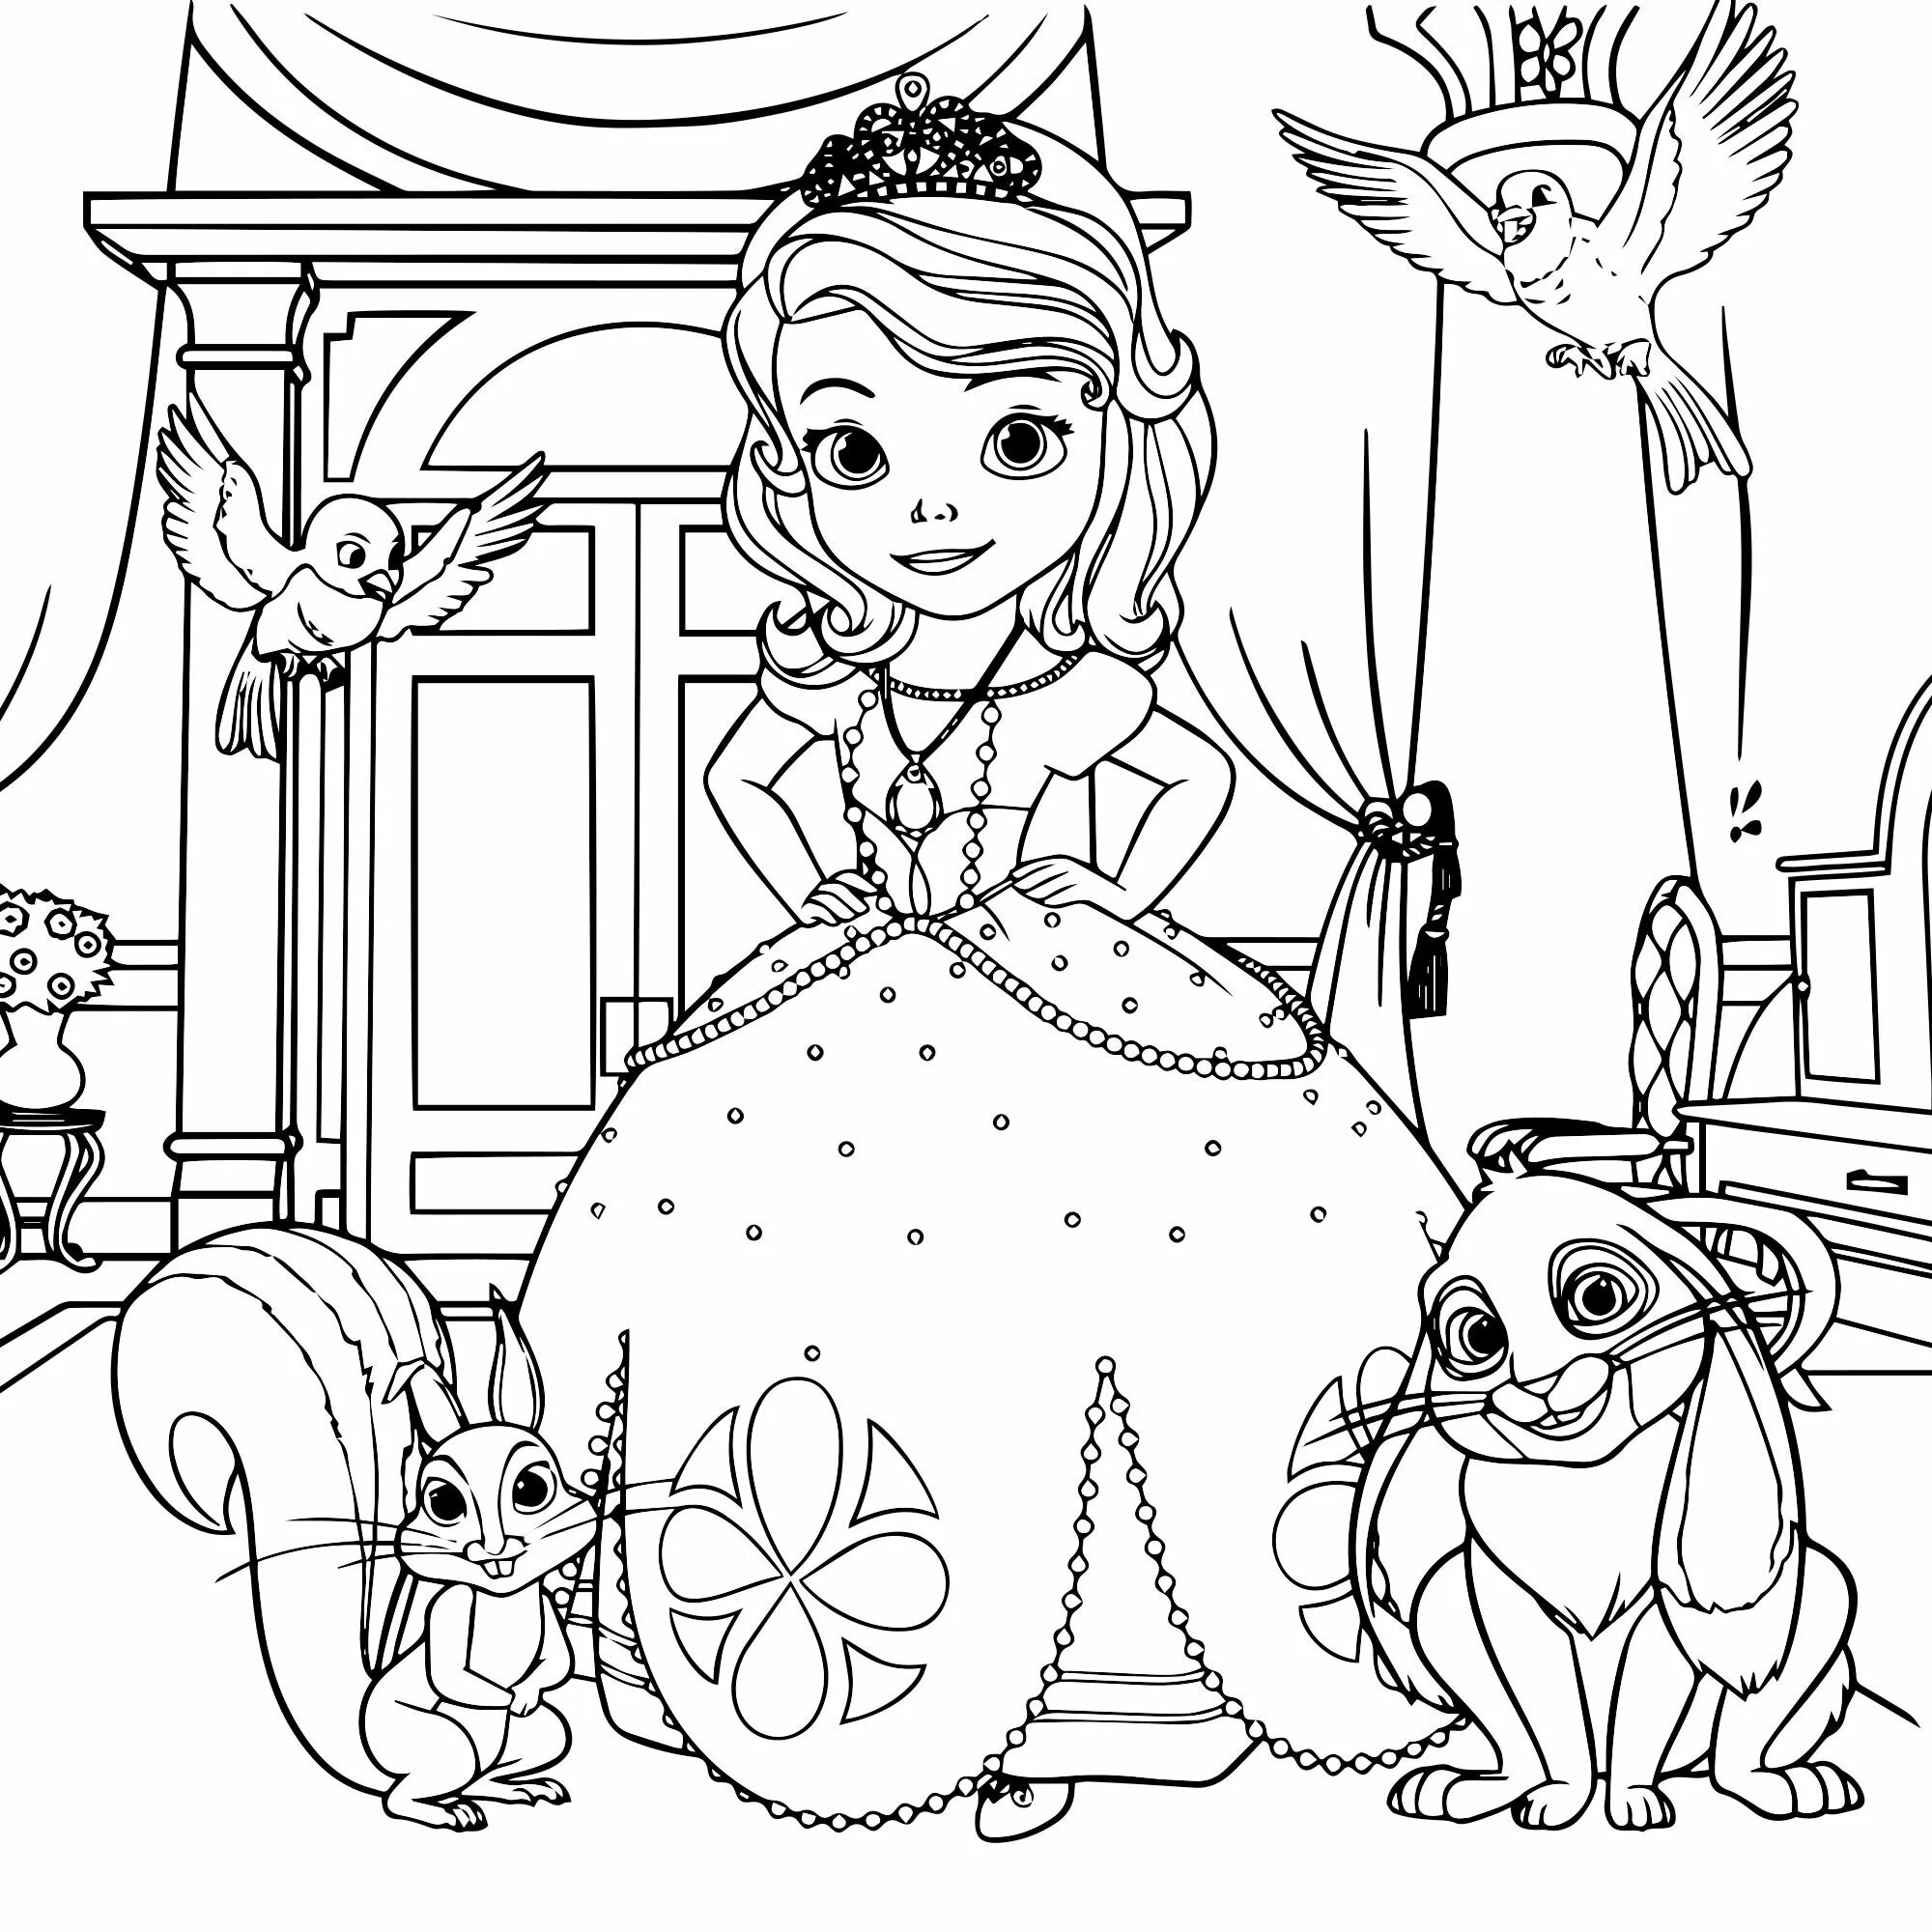 Luxurious princess coloring book for kids